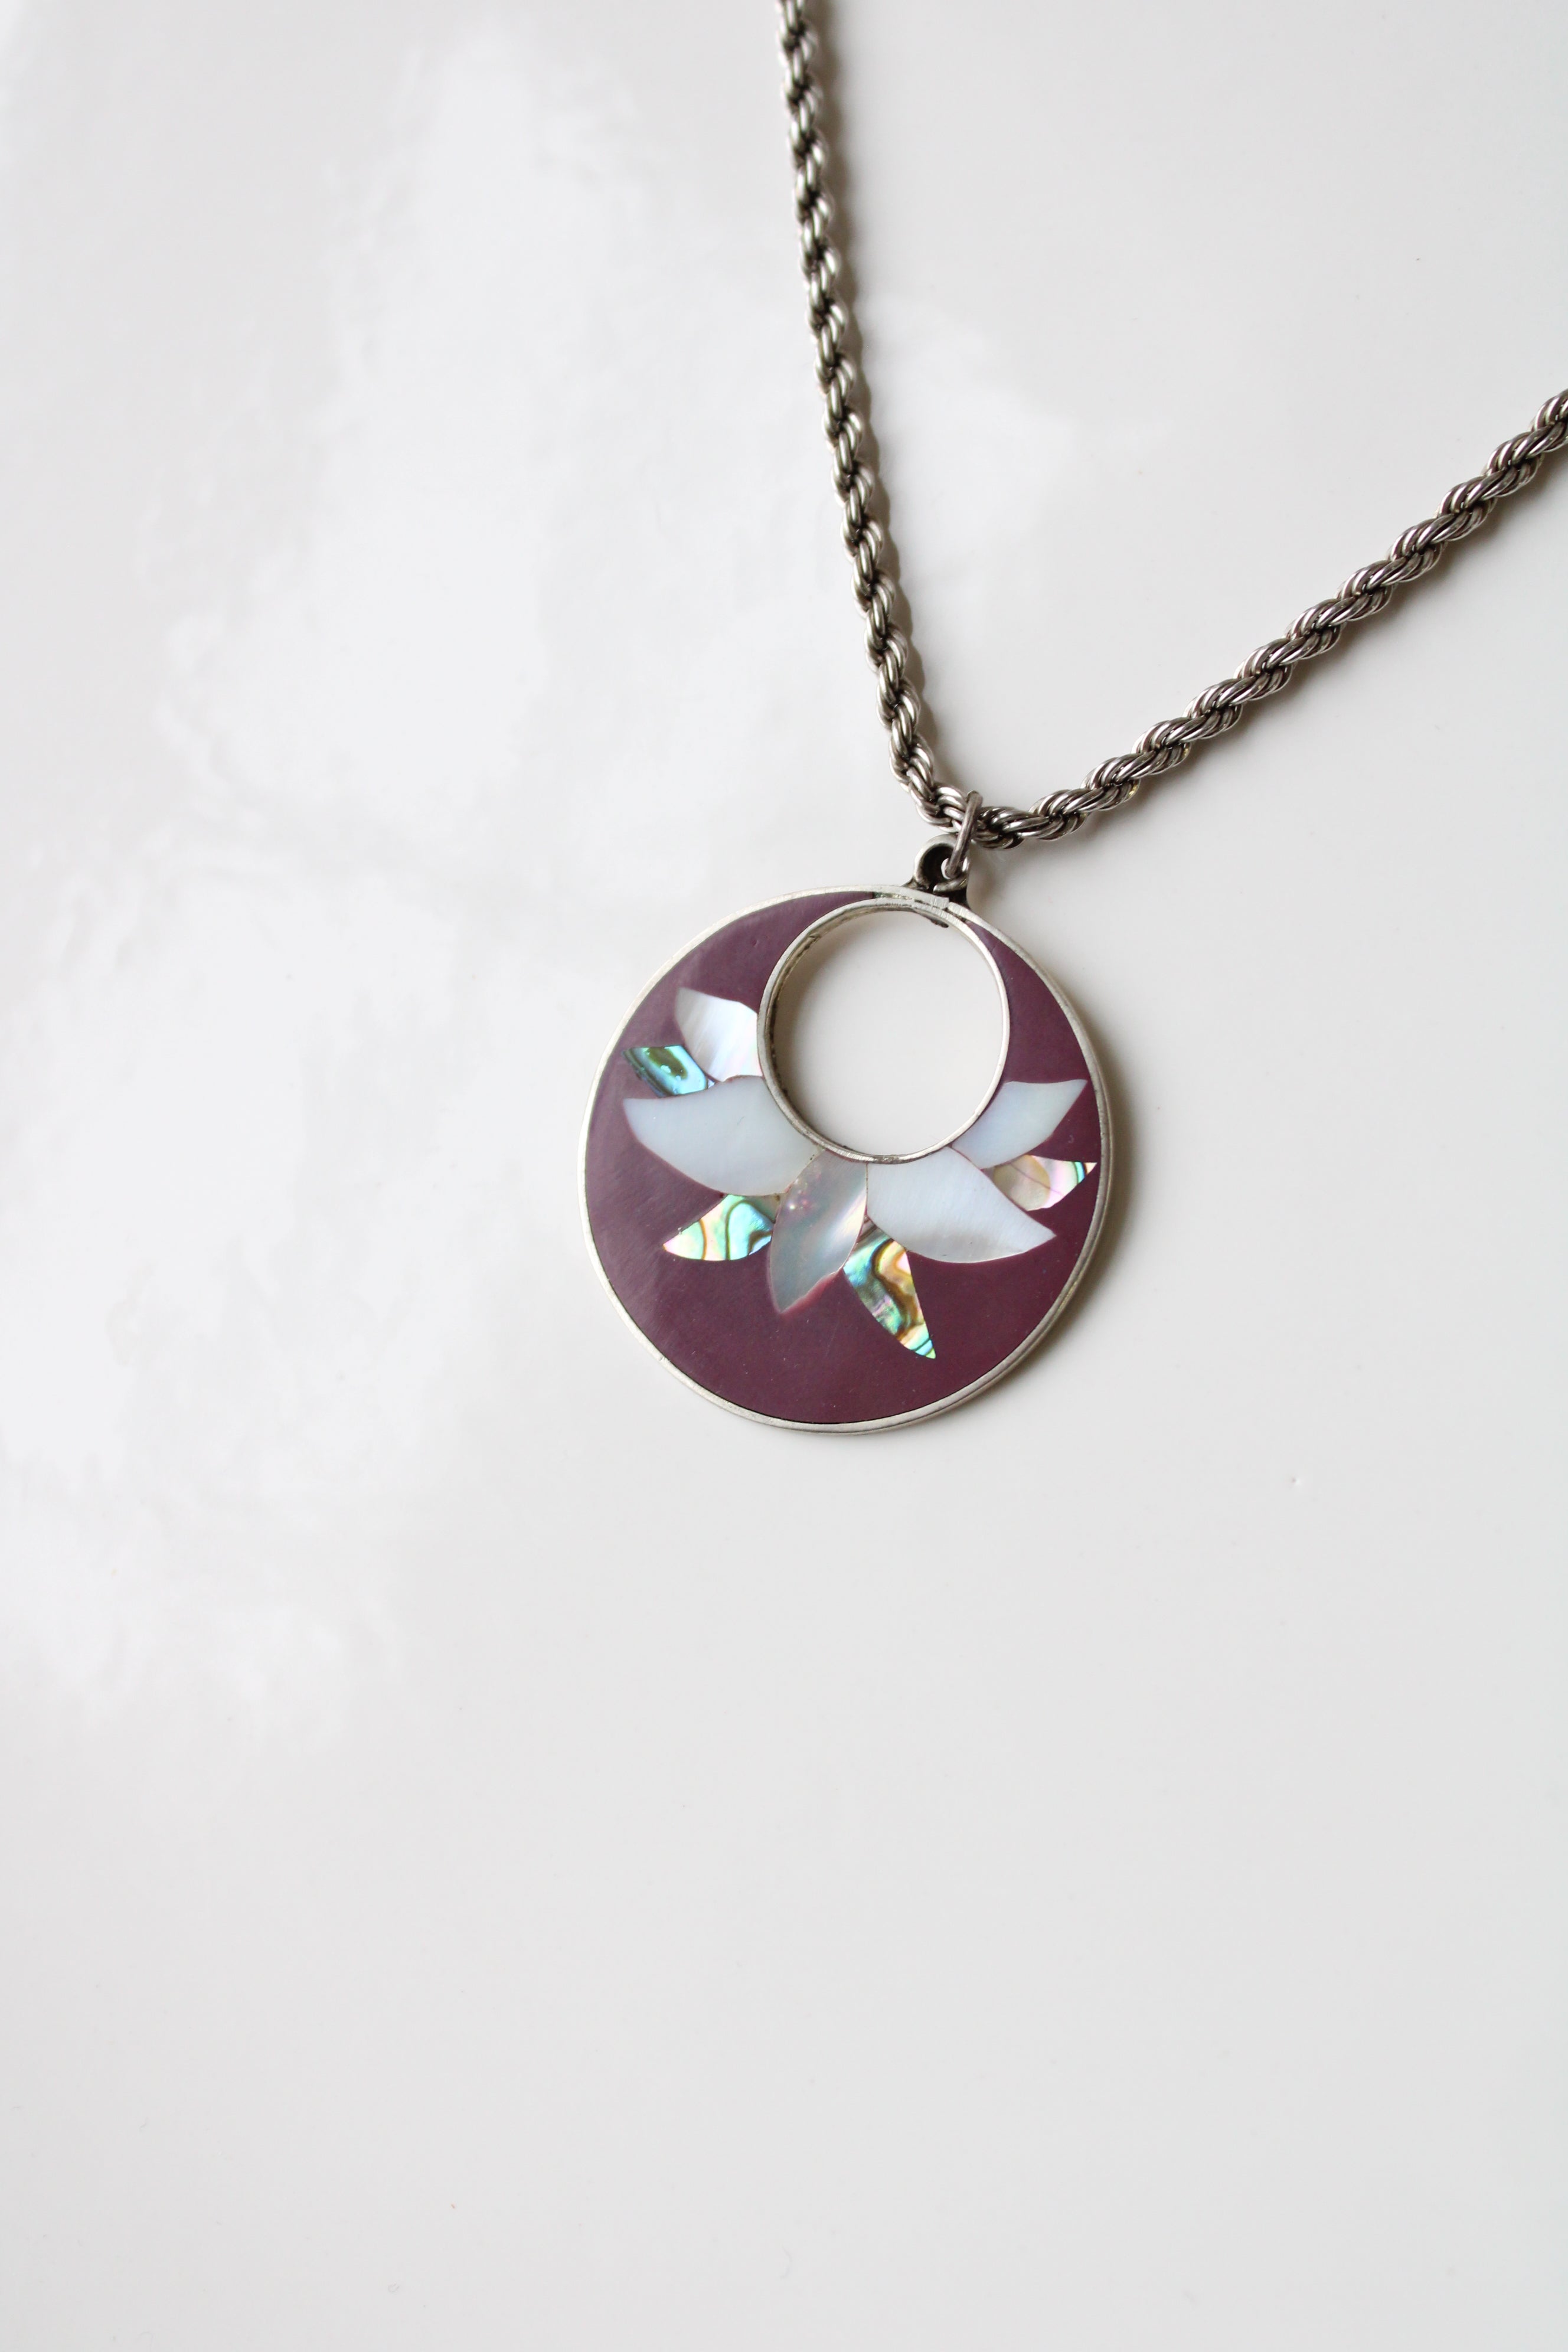 Abalone Mother Of Pearl Medallion Necklace